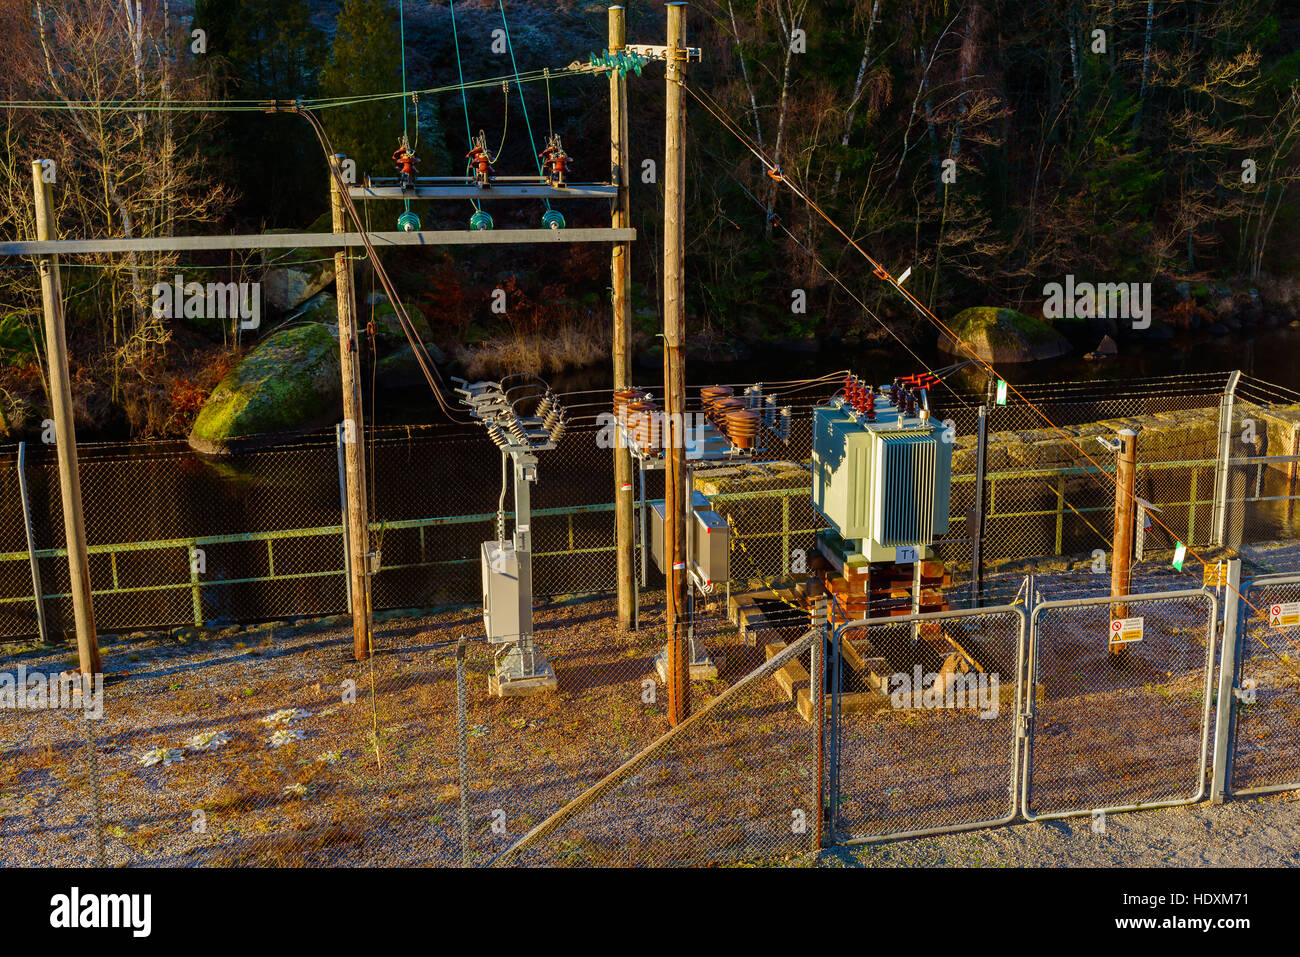 Brantafors, Sweden - December 14, 2016: Documentary of local power grid. Small power substation with a river in the background. Barbed wire fencing su Stock Photo